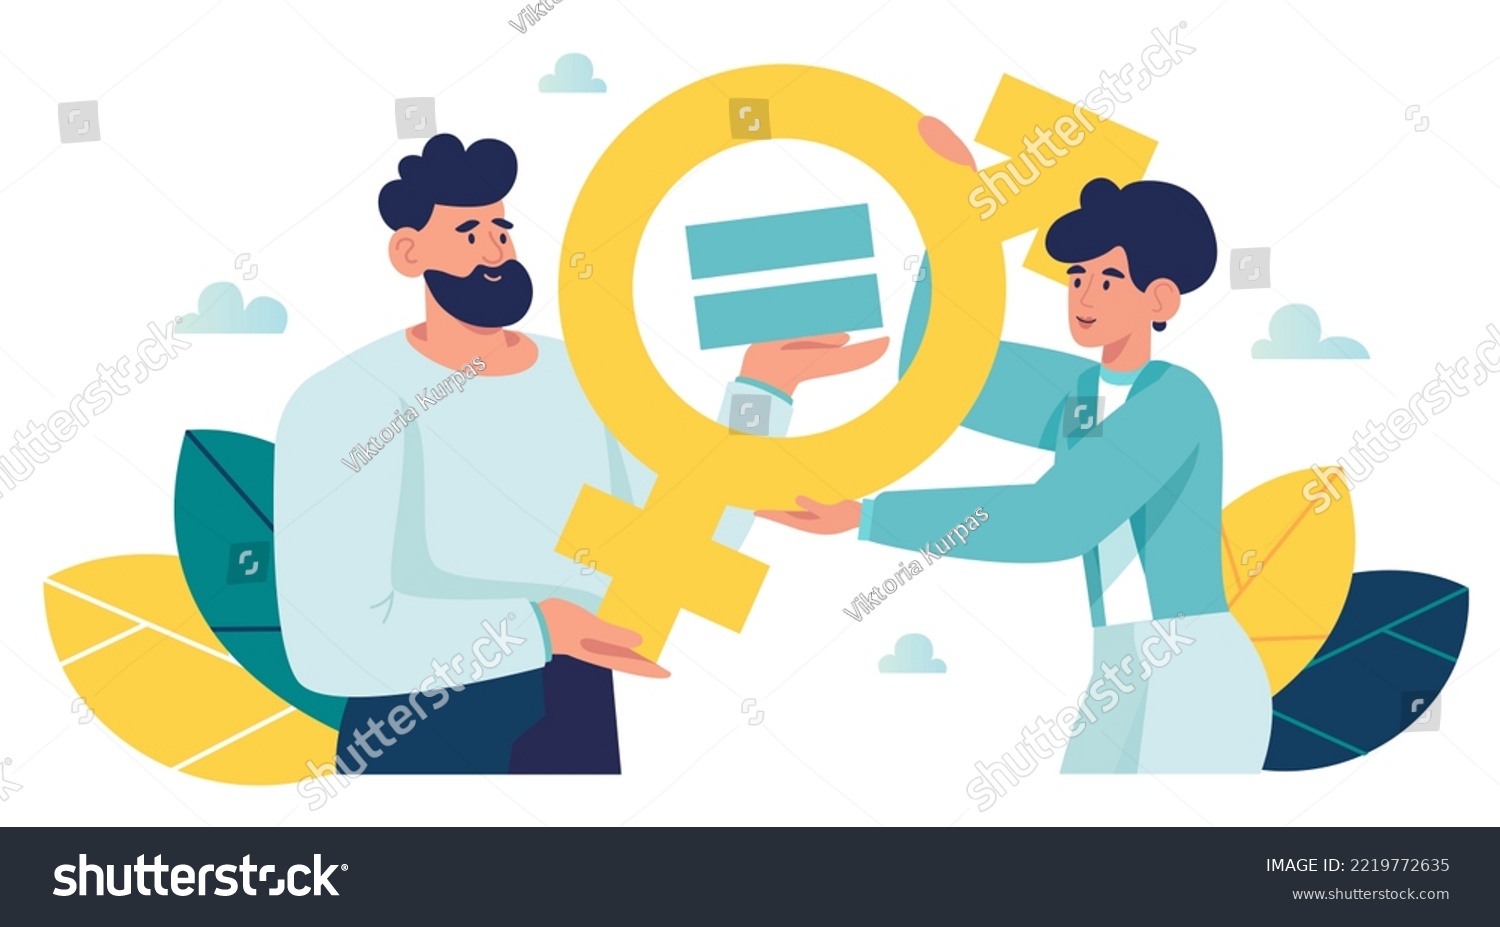 Gender equality equal treatment male and female in society business. Concept balance on man and woman equal opportunities. fair opportunities for different genders. Vector flat illustration background #2219772635